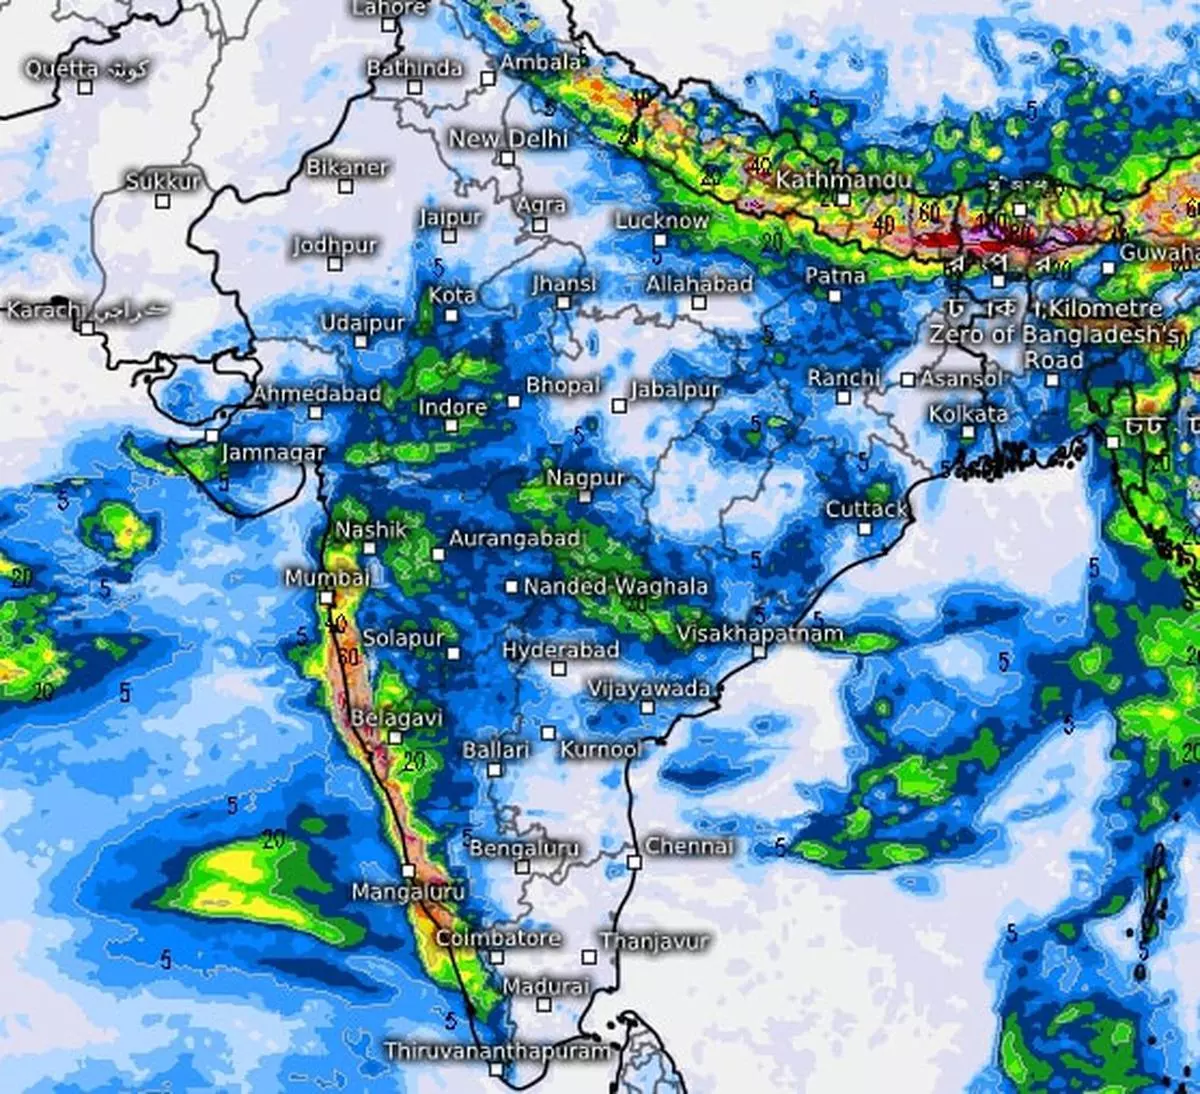 The UK Met Office has predicted rain may spread out over western parts of Central and North Peninsular India and heavier rain along the West Coast into Tuesday as a fresh spell unfolds over the regions.